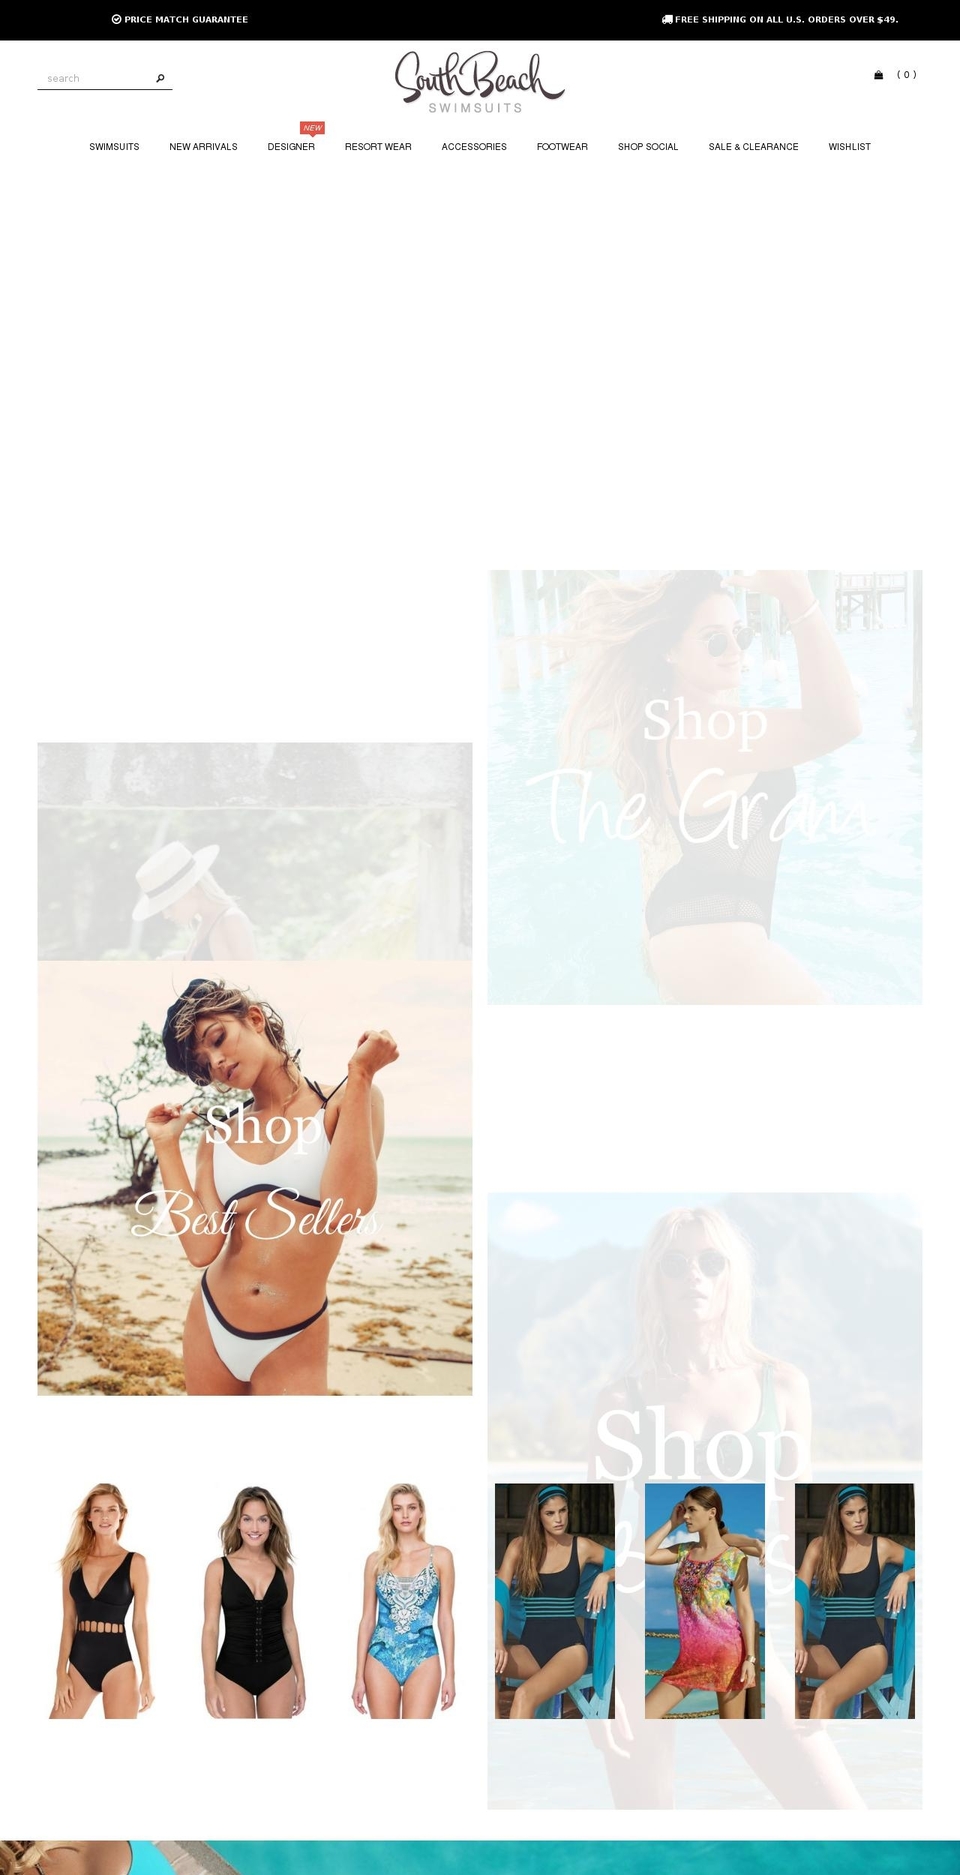 Made With ❤ By Minion Made - Updated Checkout Shopify theme site example mastectomyswim.com